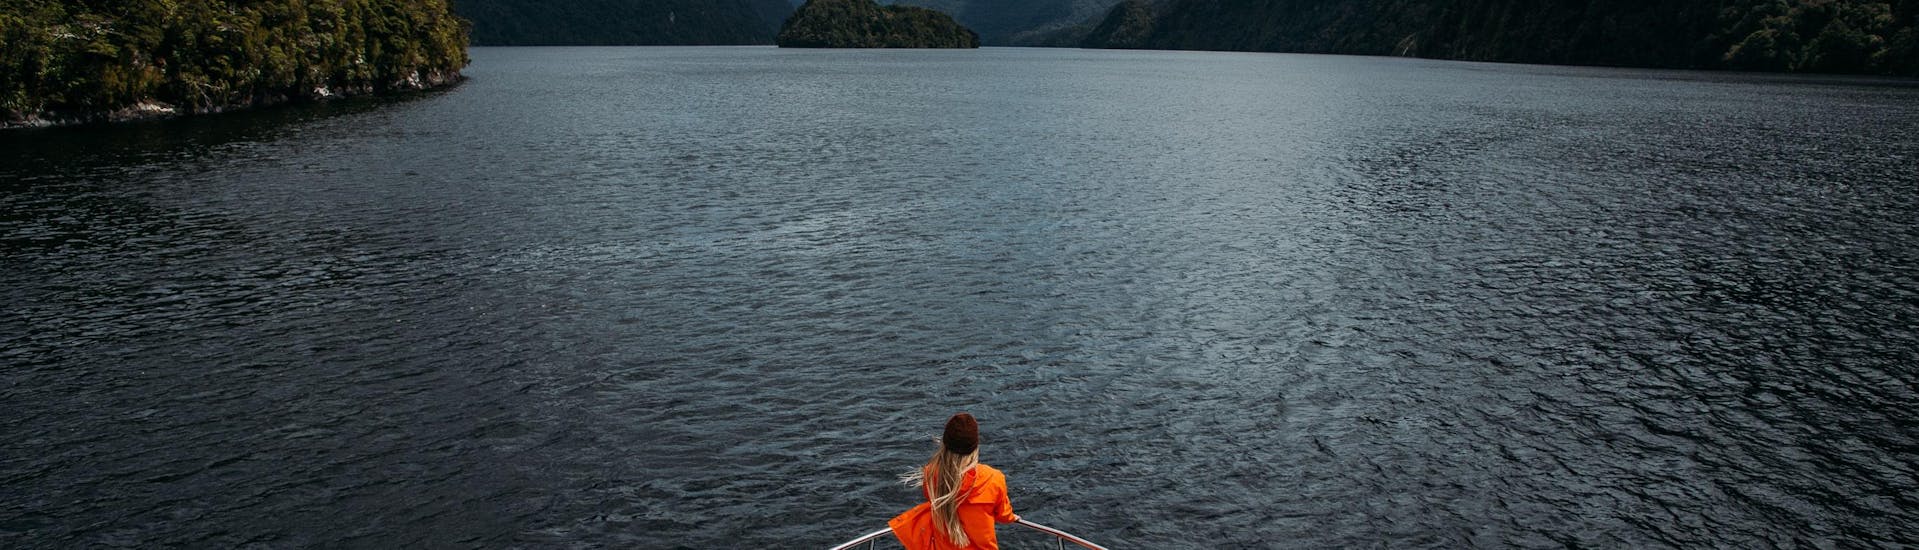 A participant of the Doubtful Sound Cruise organized by Go Orange is enjoying views from Tasman Explorer vessel